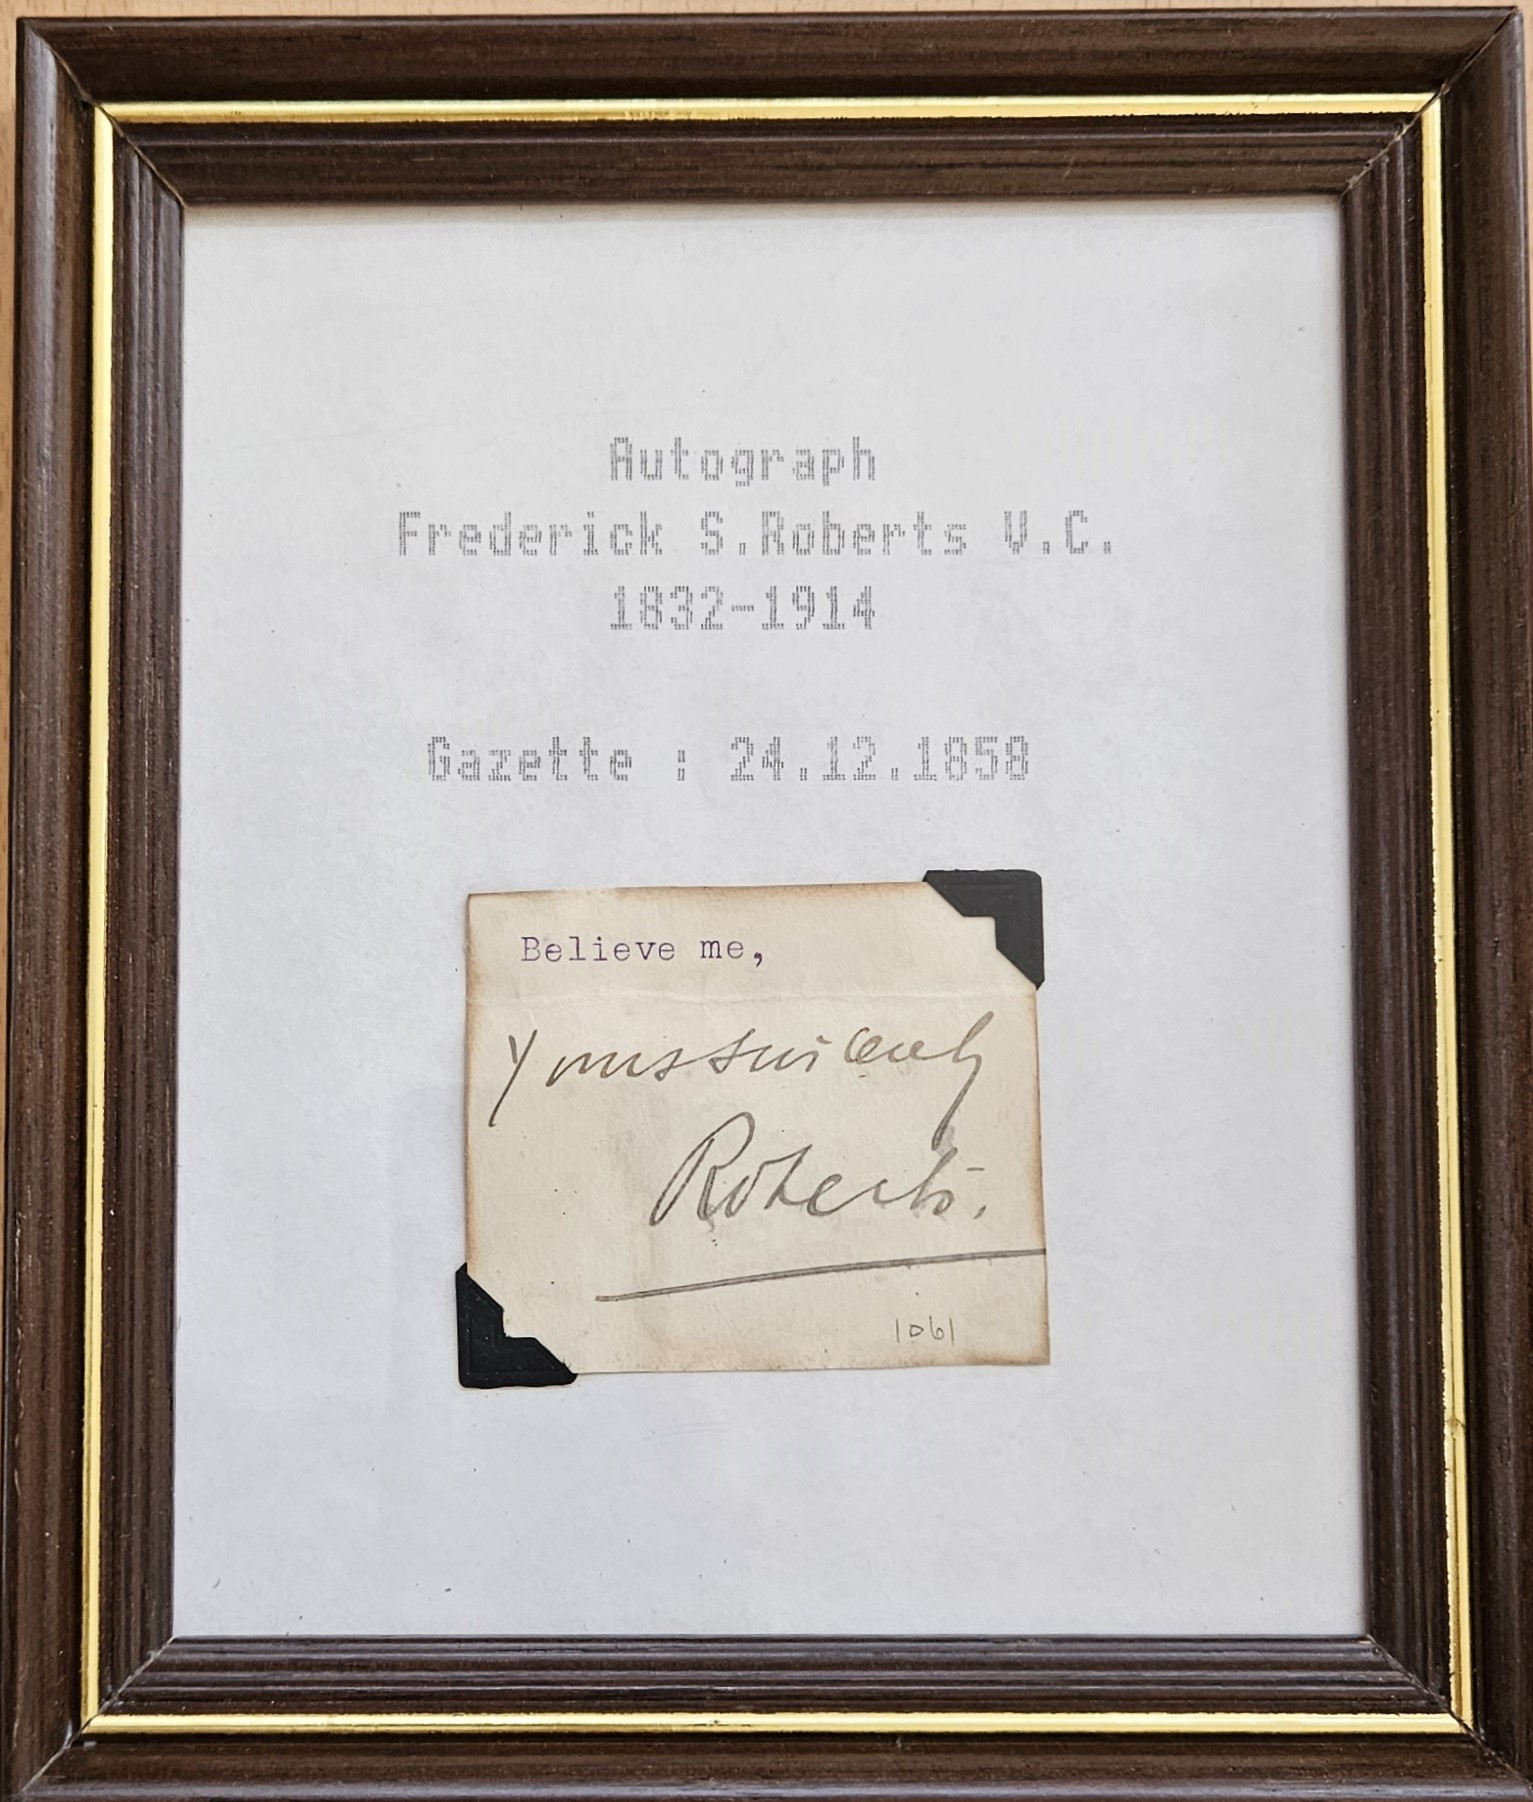 Fredrick S Roberts V.C Winner 1832-1914 signed album page. Housed in frame overall size 6x8, album